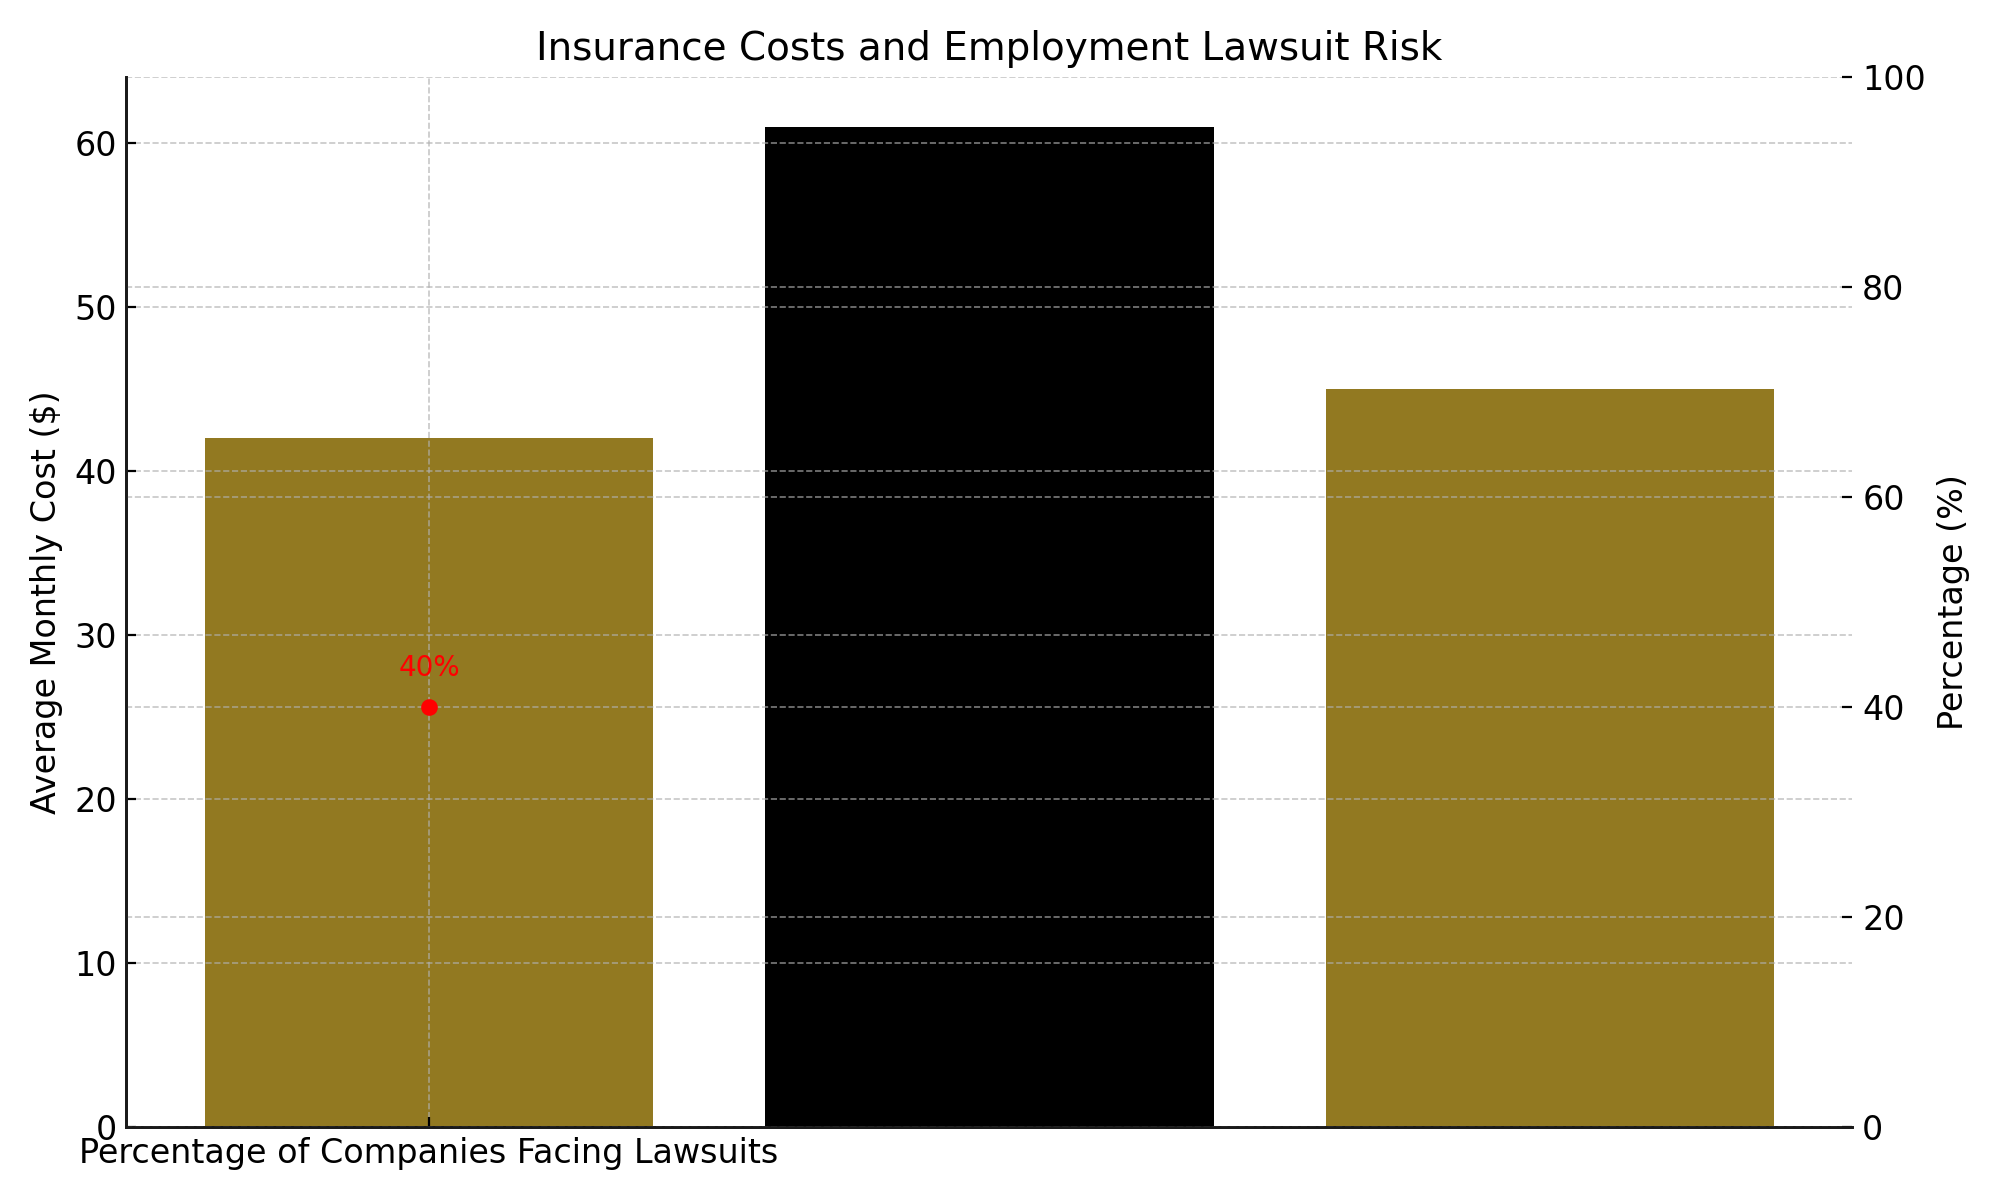 Bar Chart of Insurance ost and Employment Lawsuit Risks